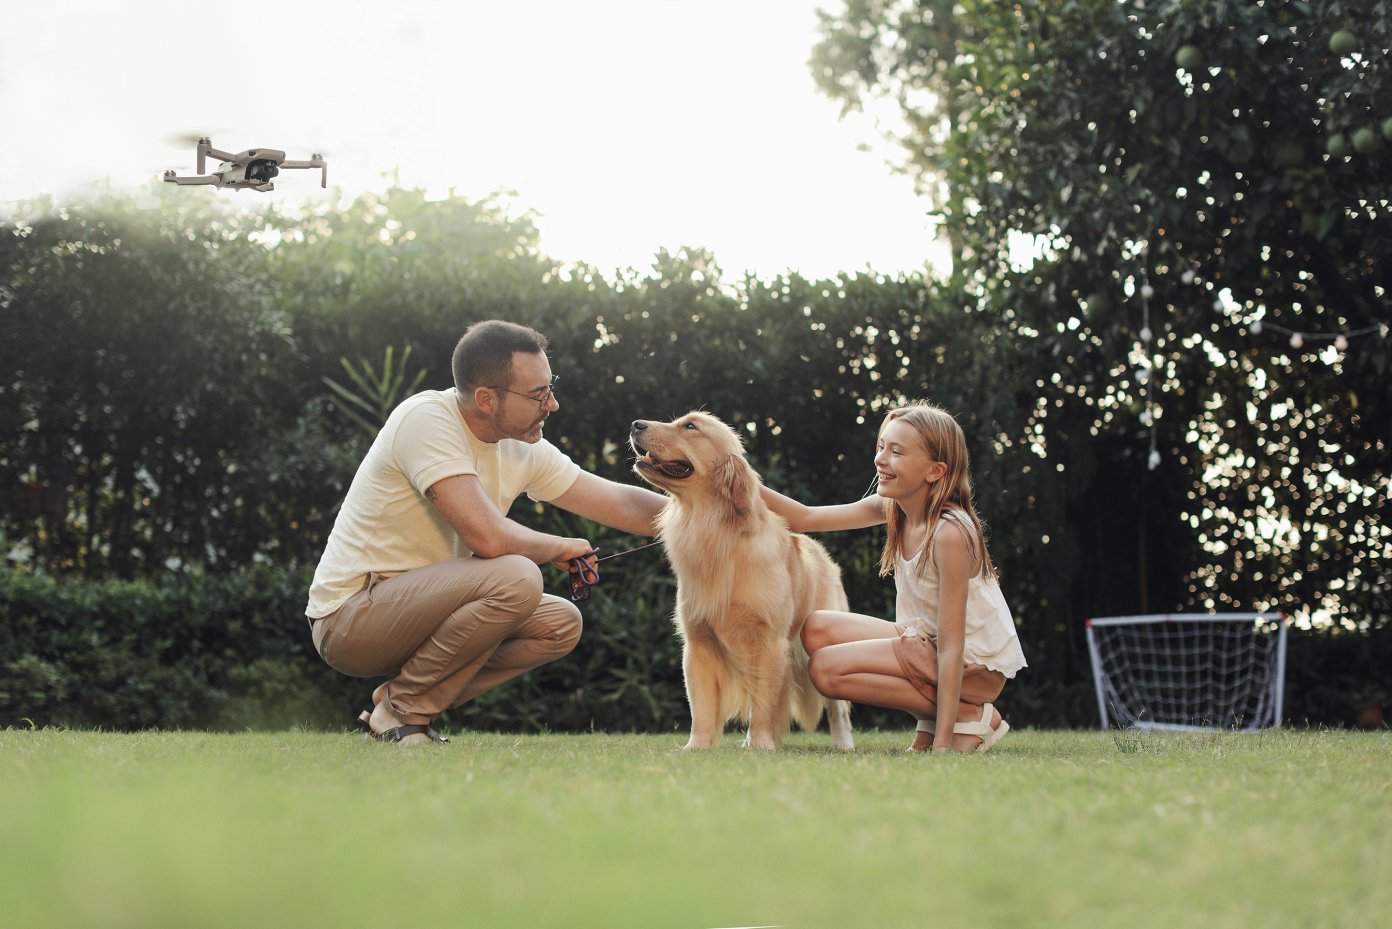 Family with dog and DJI Mavic Mini flying in background